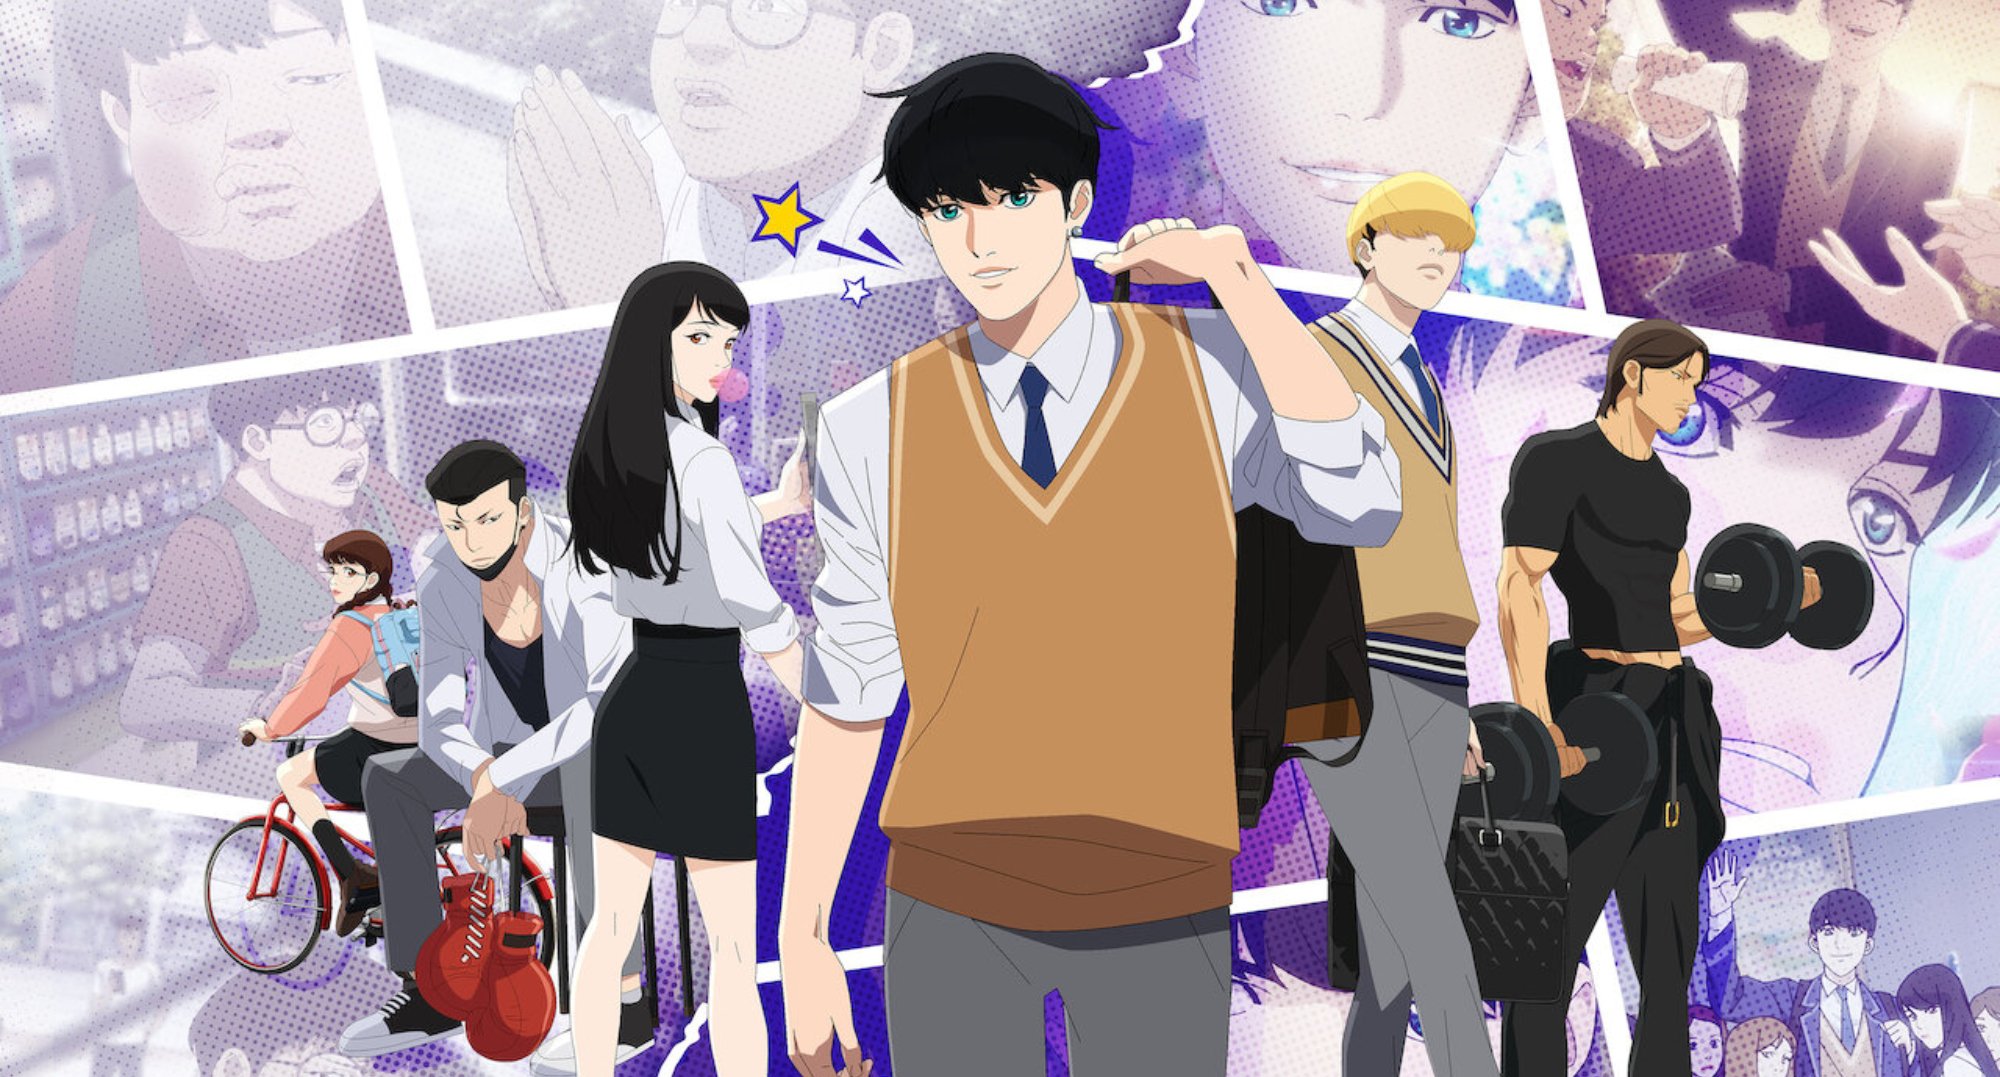 Park Hyung-suk and the main characters of the webtoon anime 'Lookism.'